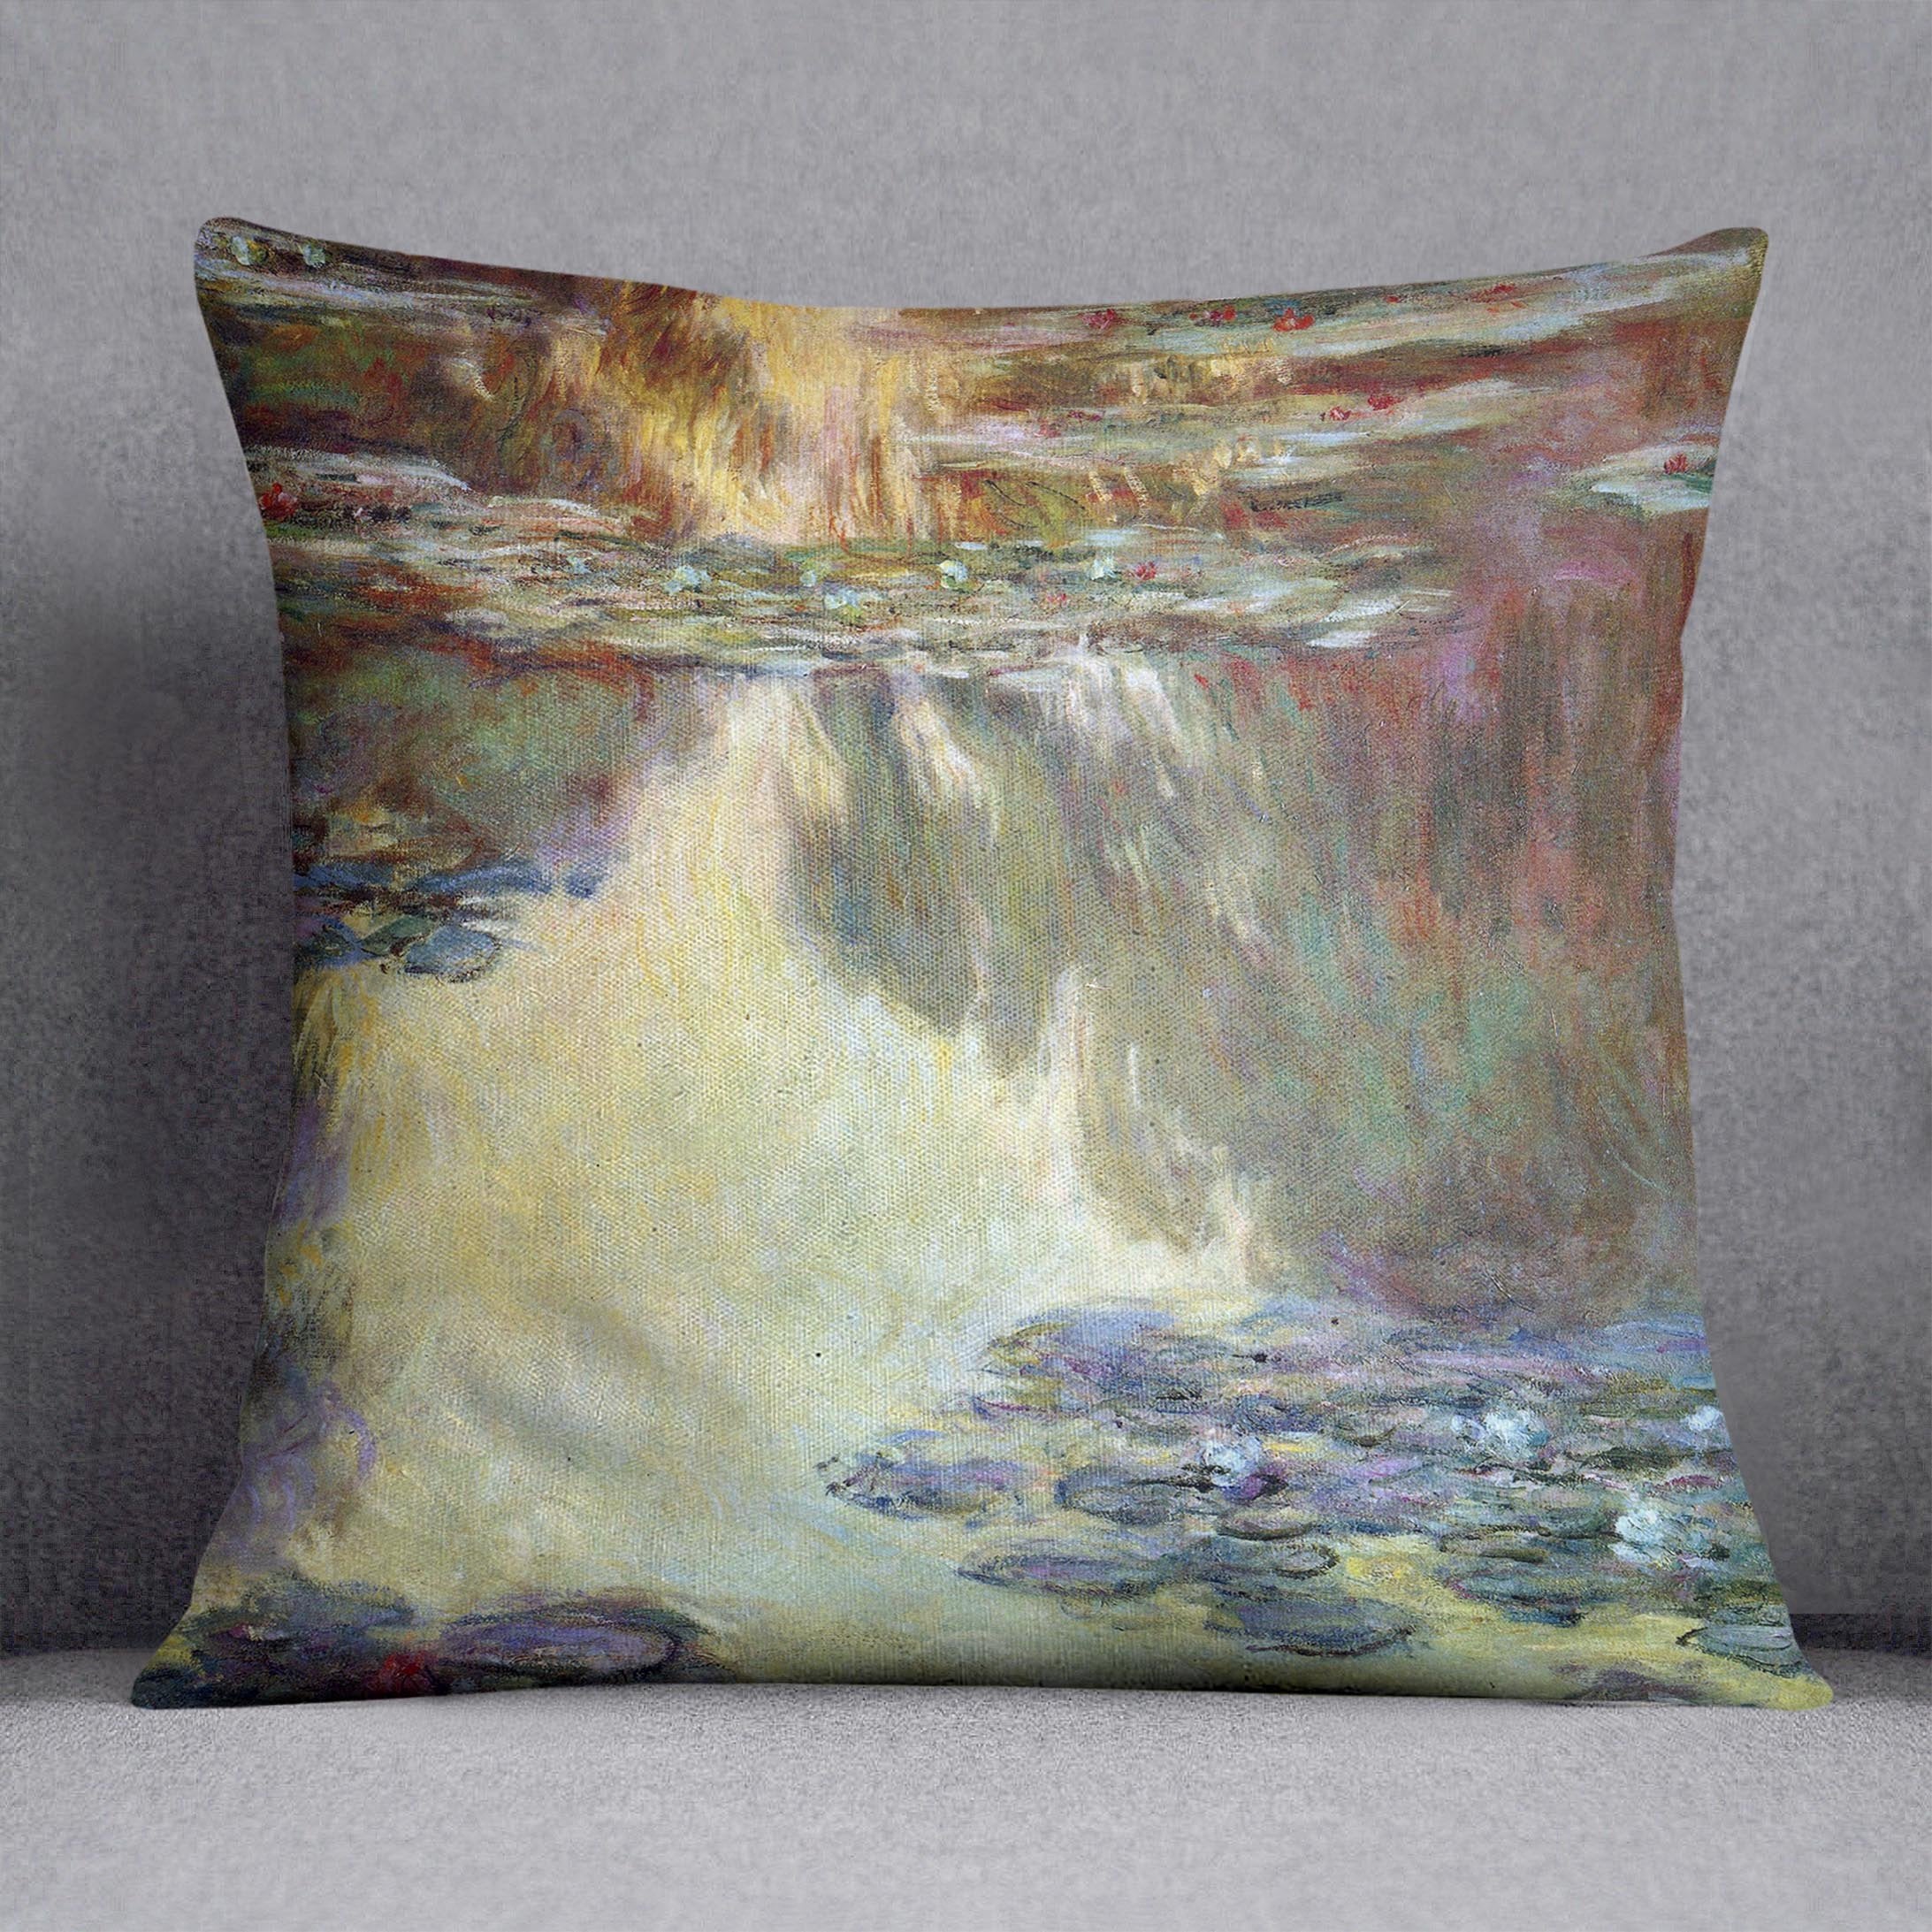 Water lilies water landscape 6 by Monet Throw Pillow